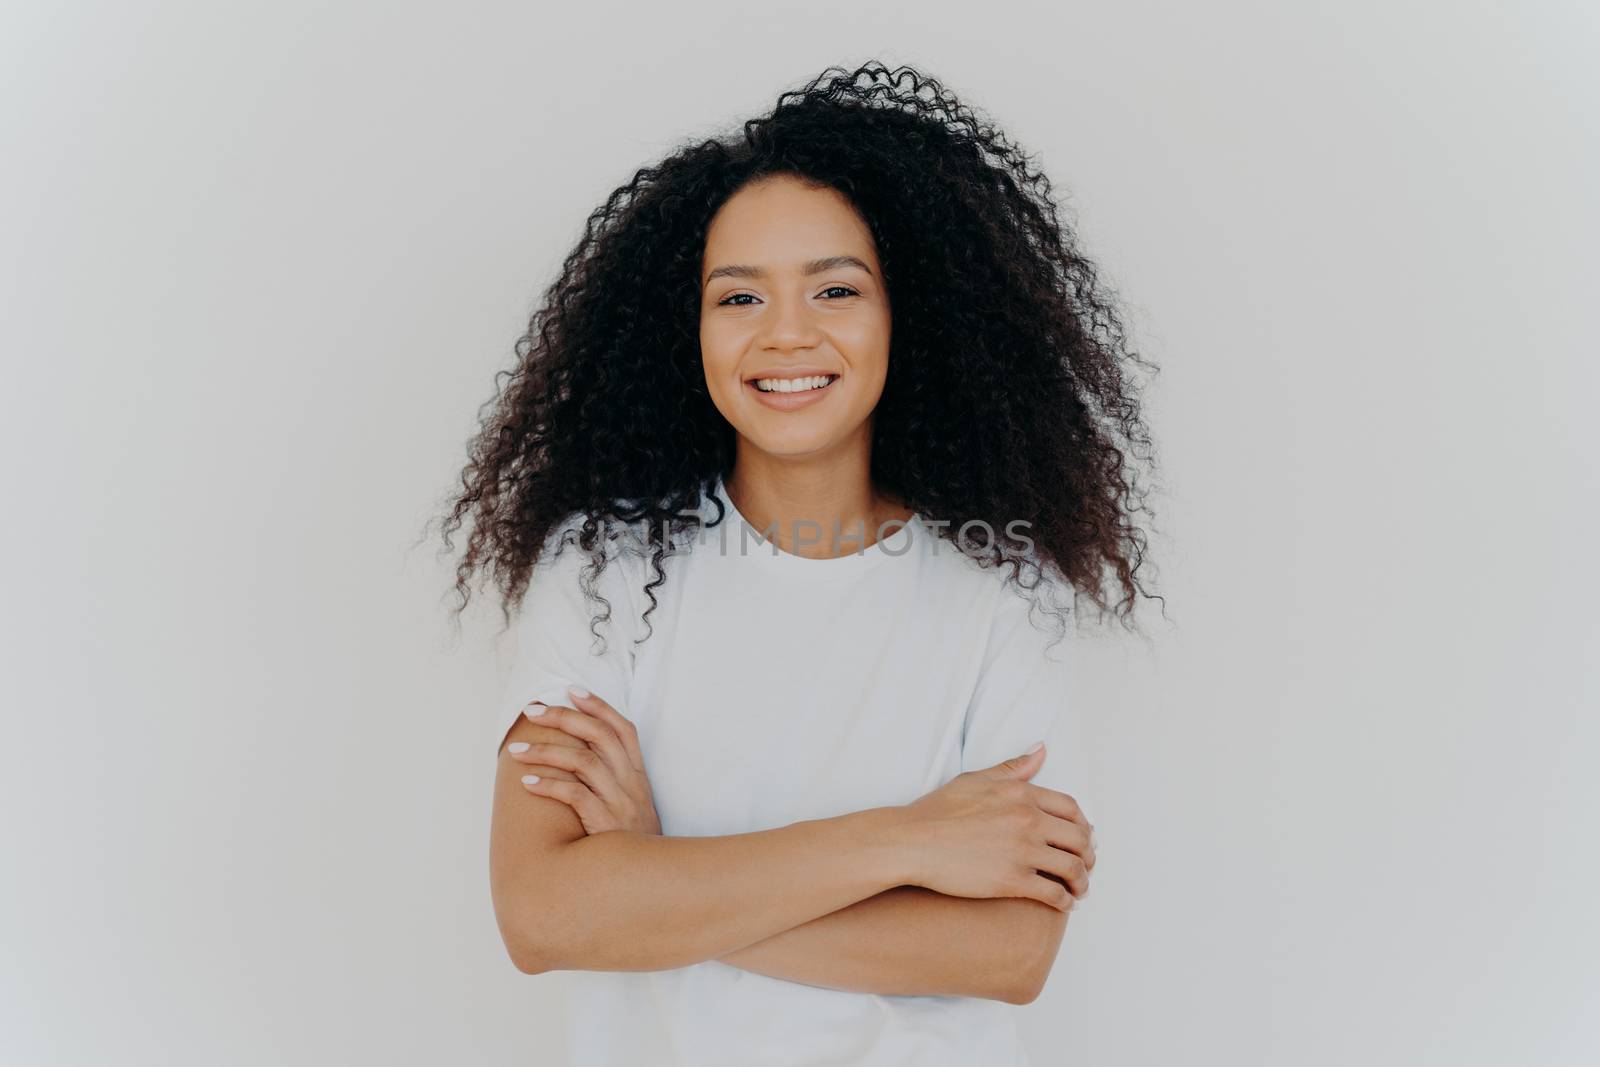 Portrait of young pleasant looking woman with curly hair, keeps hands crossed, wears white t shirt, smiles broadly at camera, has timid shy expression, poses indoor, has natural beauty. Emotions by vkstock